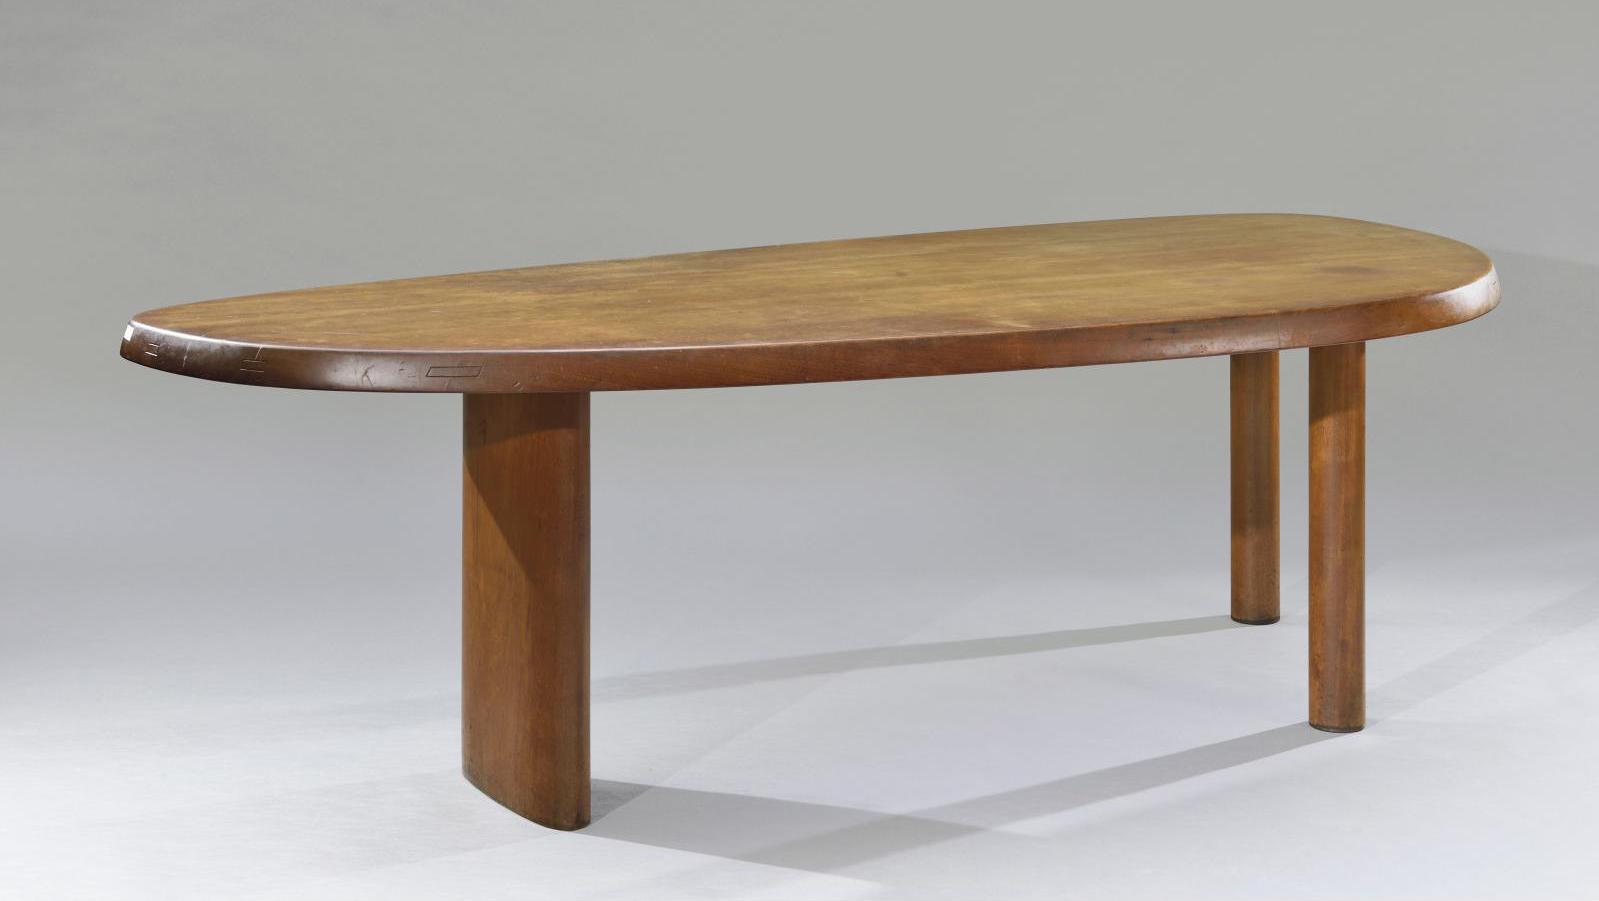 Charlotte Perriand (1903–1999), free-form "Feuille" (“Leaf”) table, c. 1960, wood... A Look at 20th-Century Design and Painting from Perriand to Combas